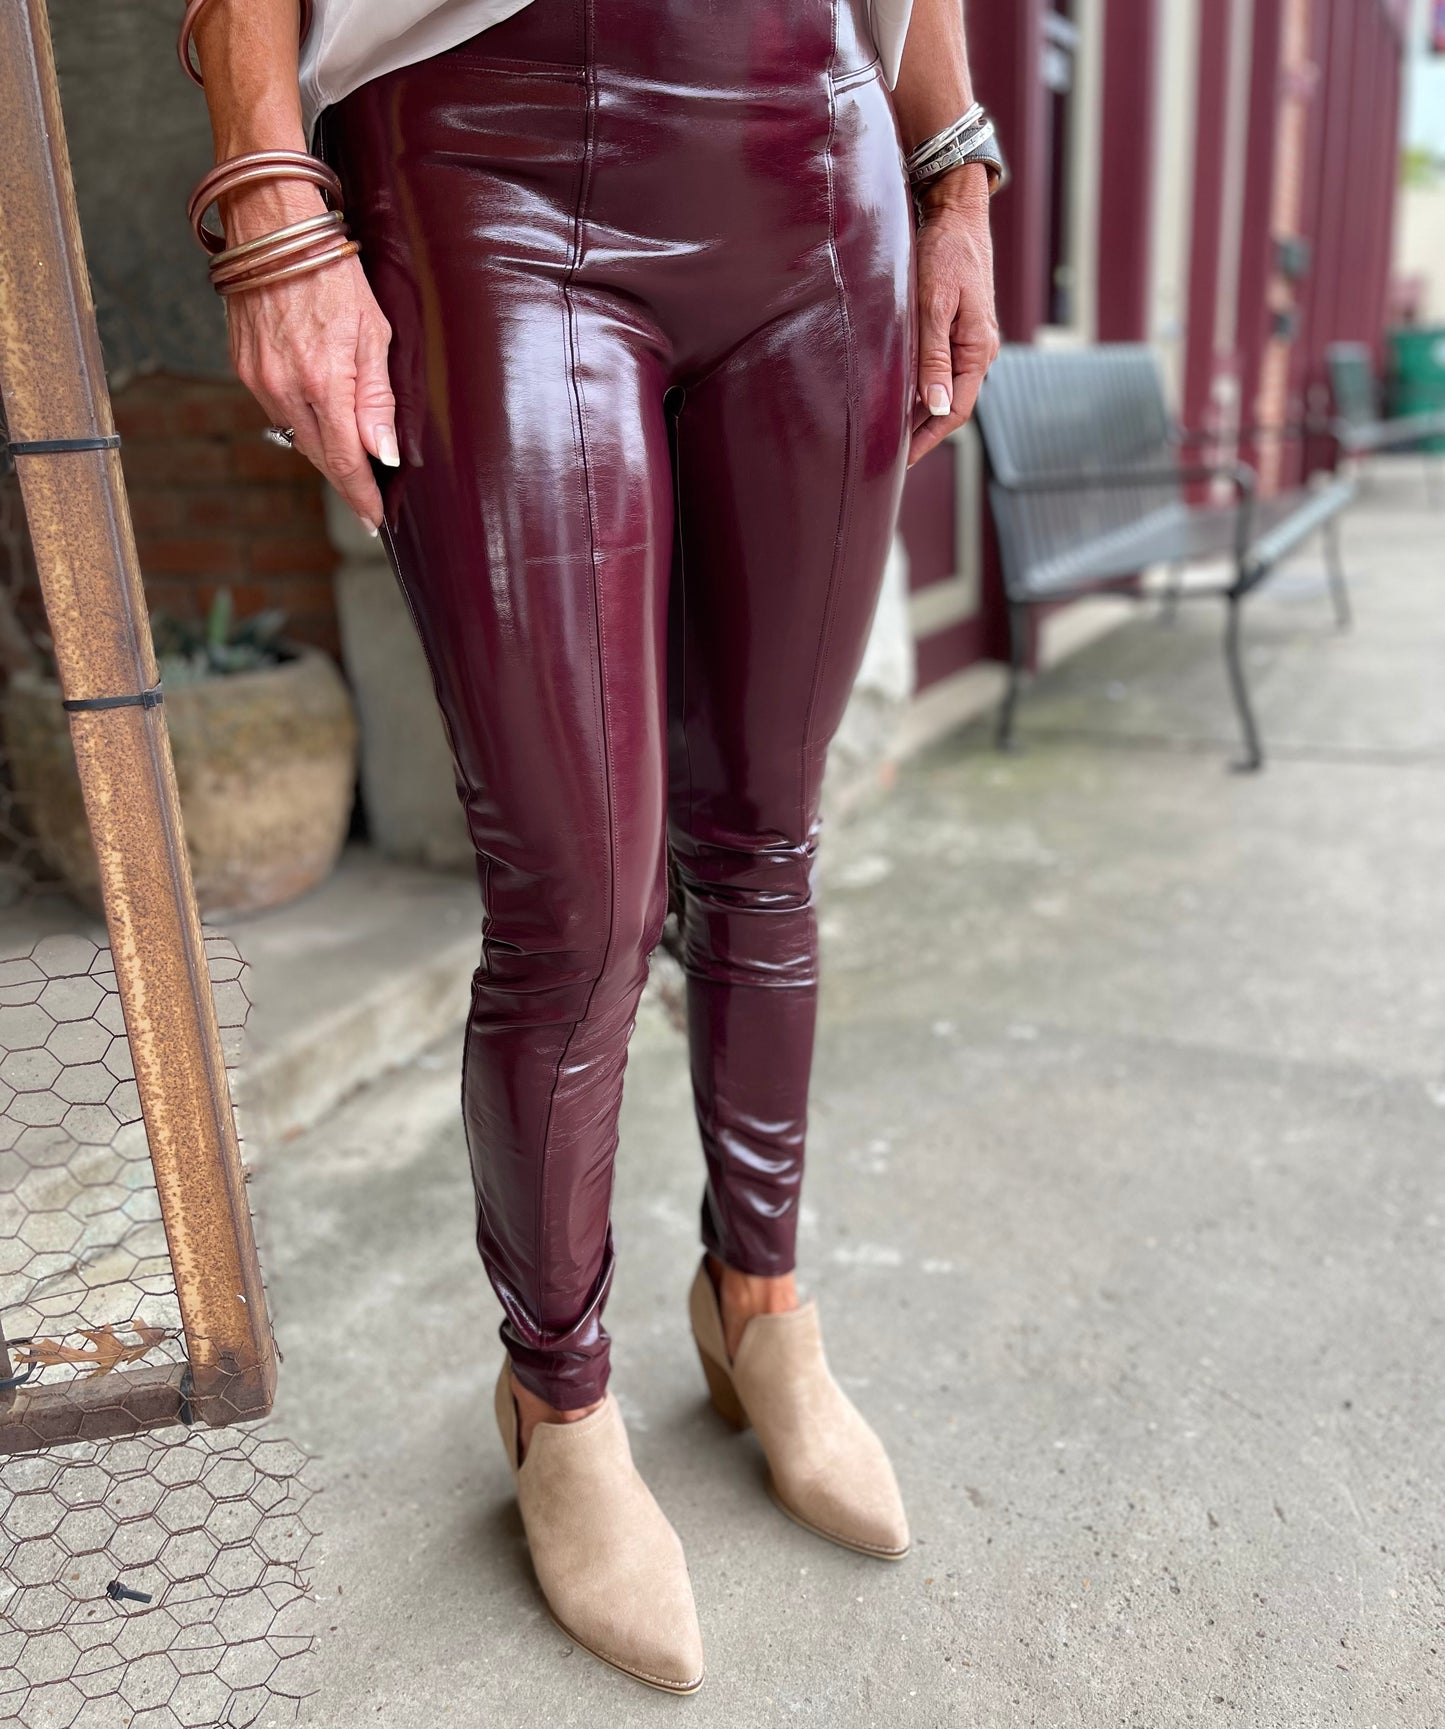 Spanx Faux Patent Leather Leggings - Wine